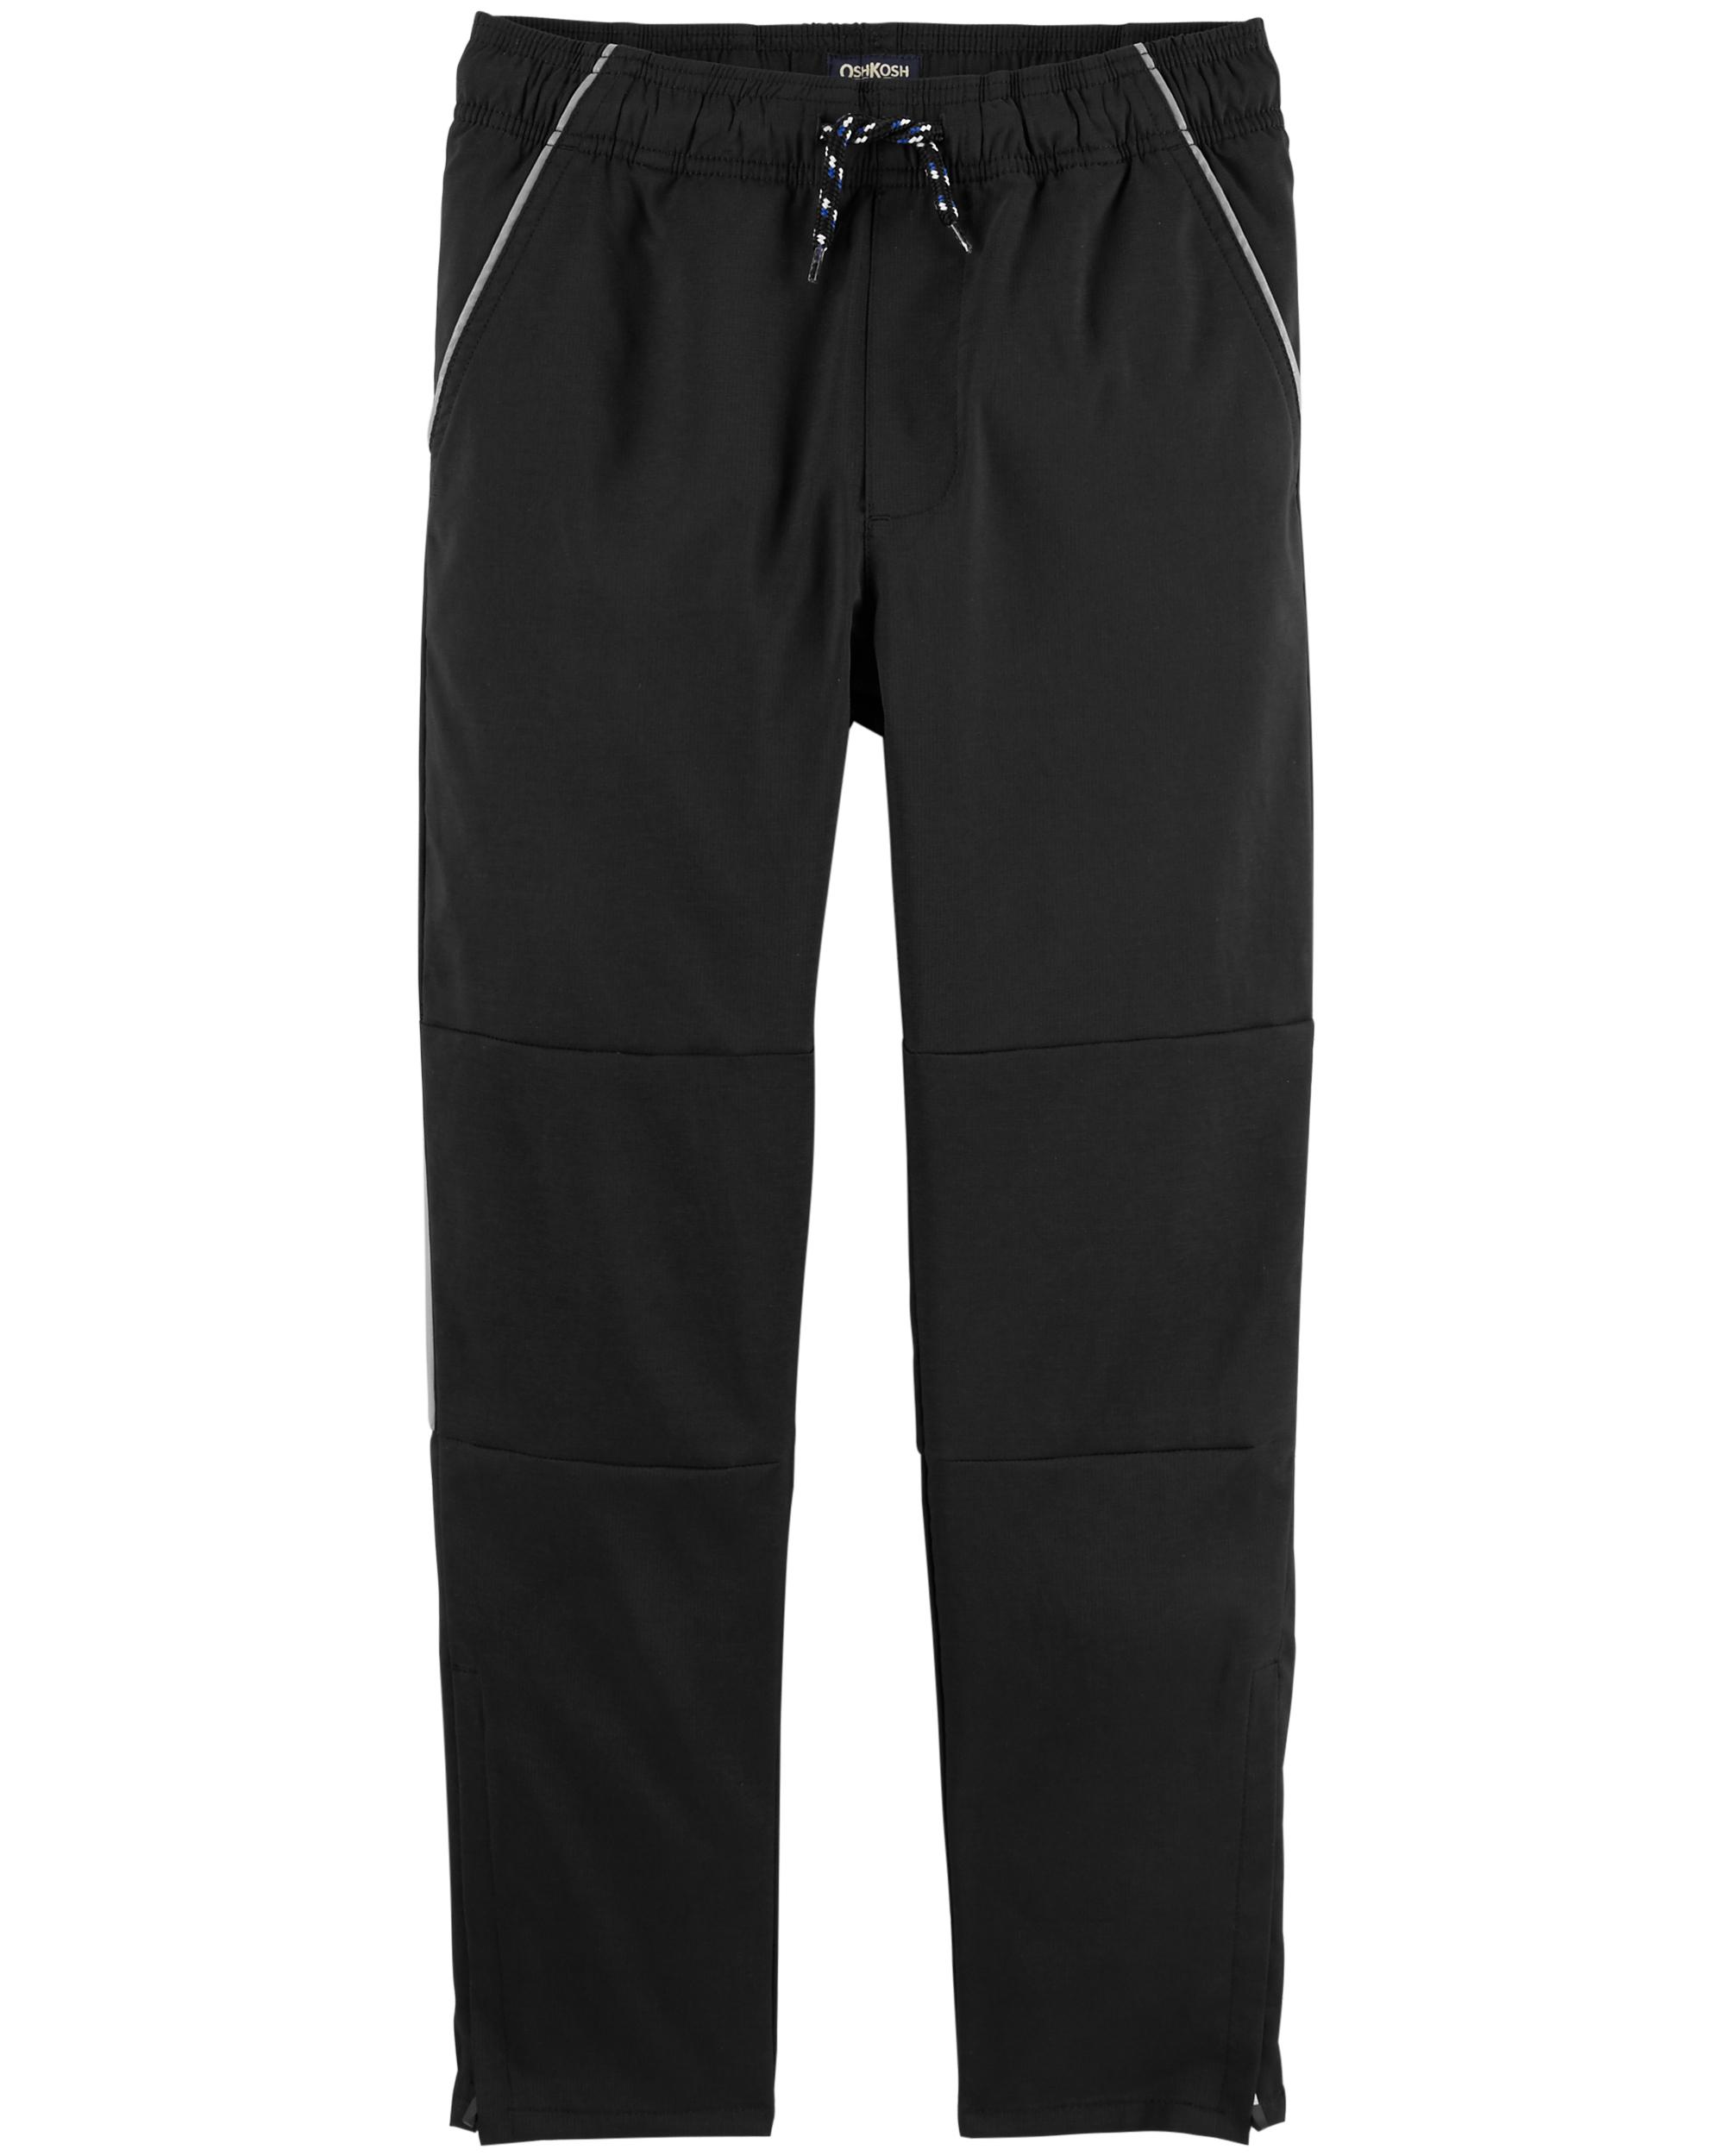 athletic pants for kids